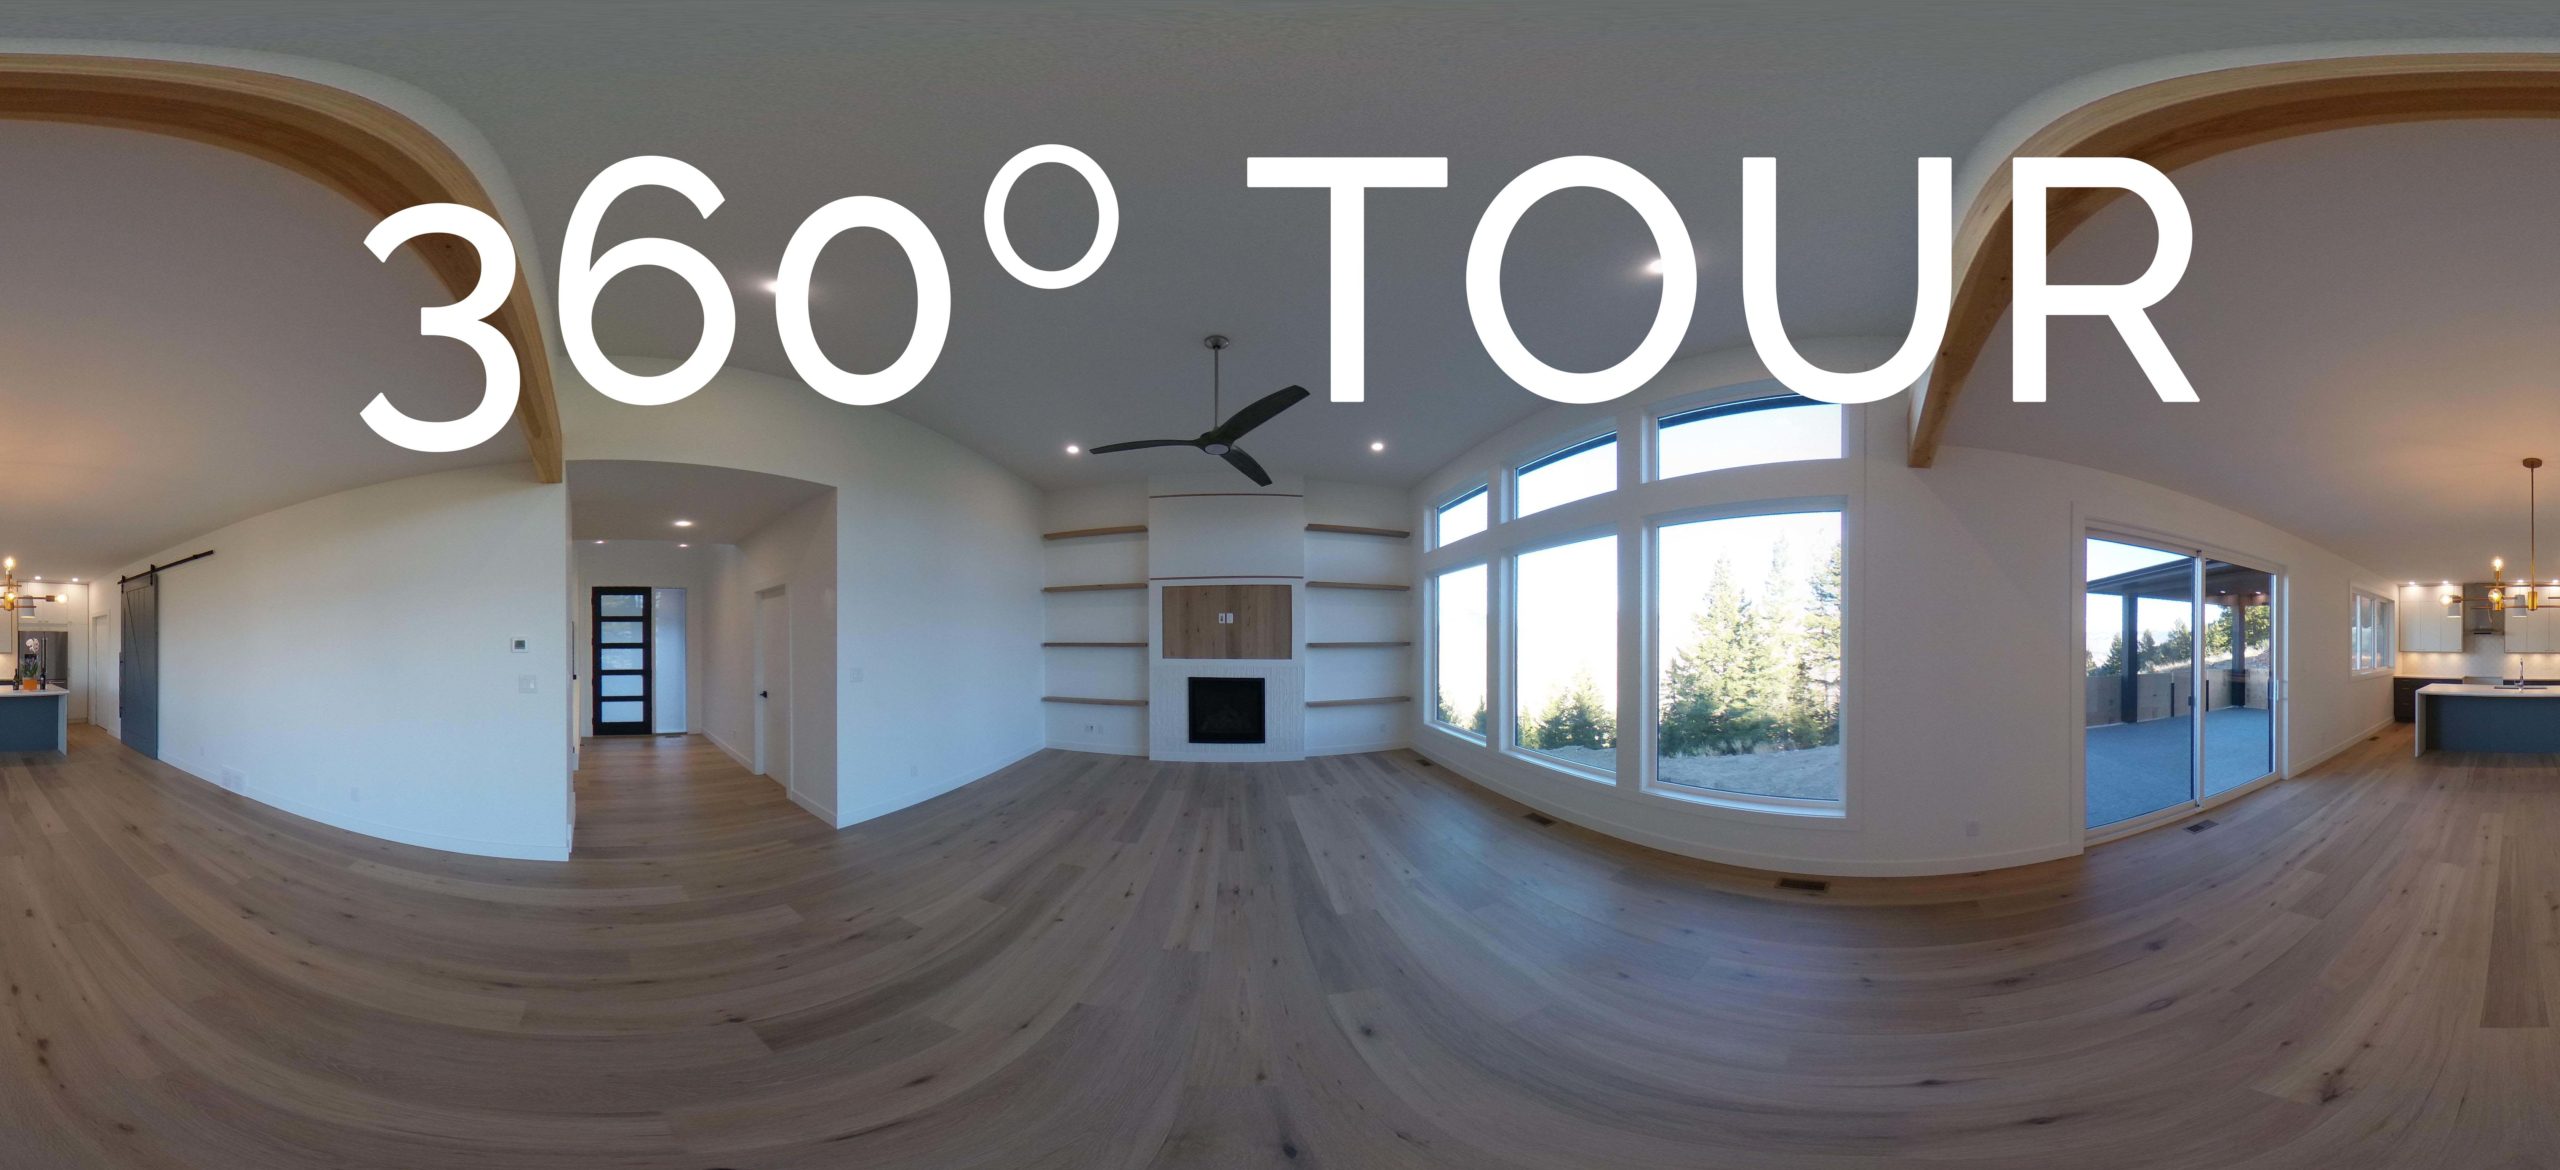 Click picture to see 360 tour of custom home during build by DNM Enterprises